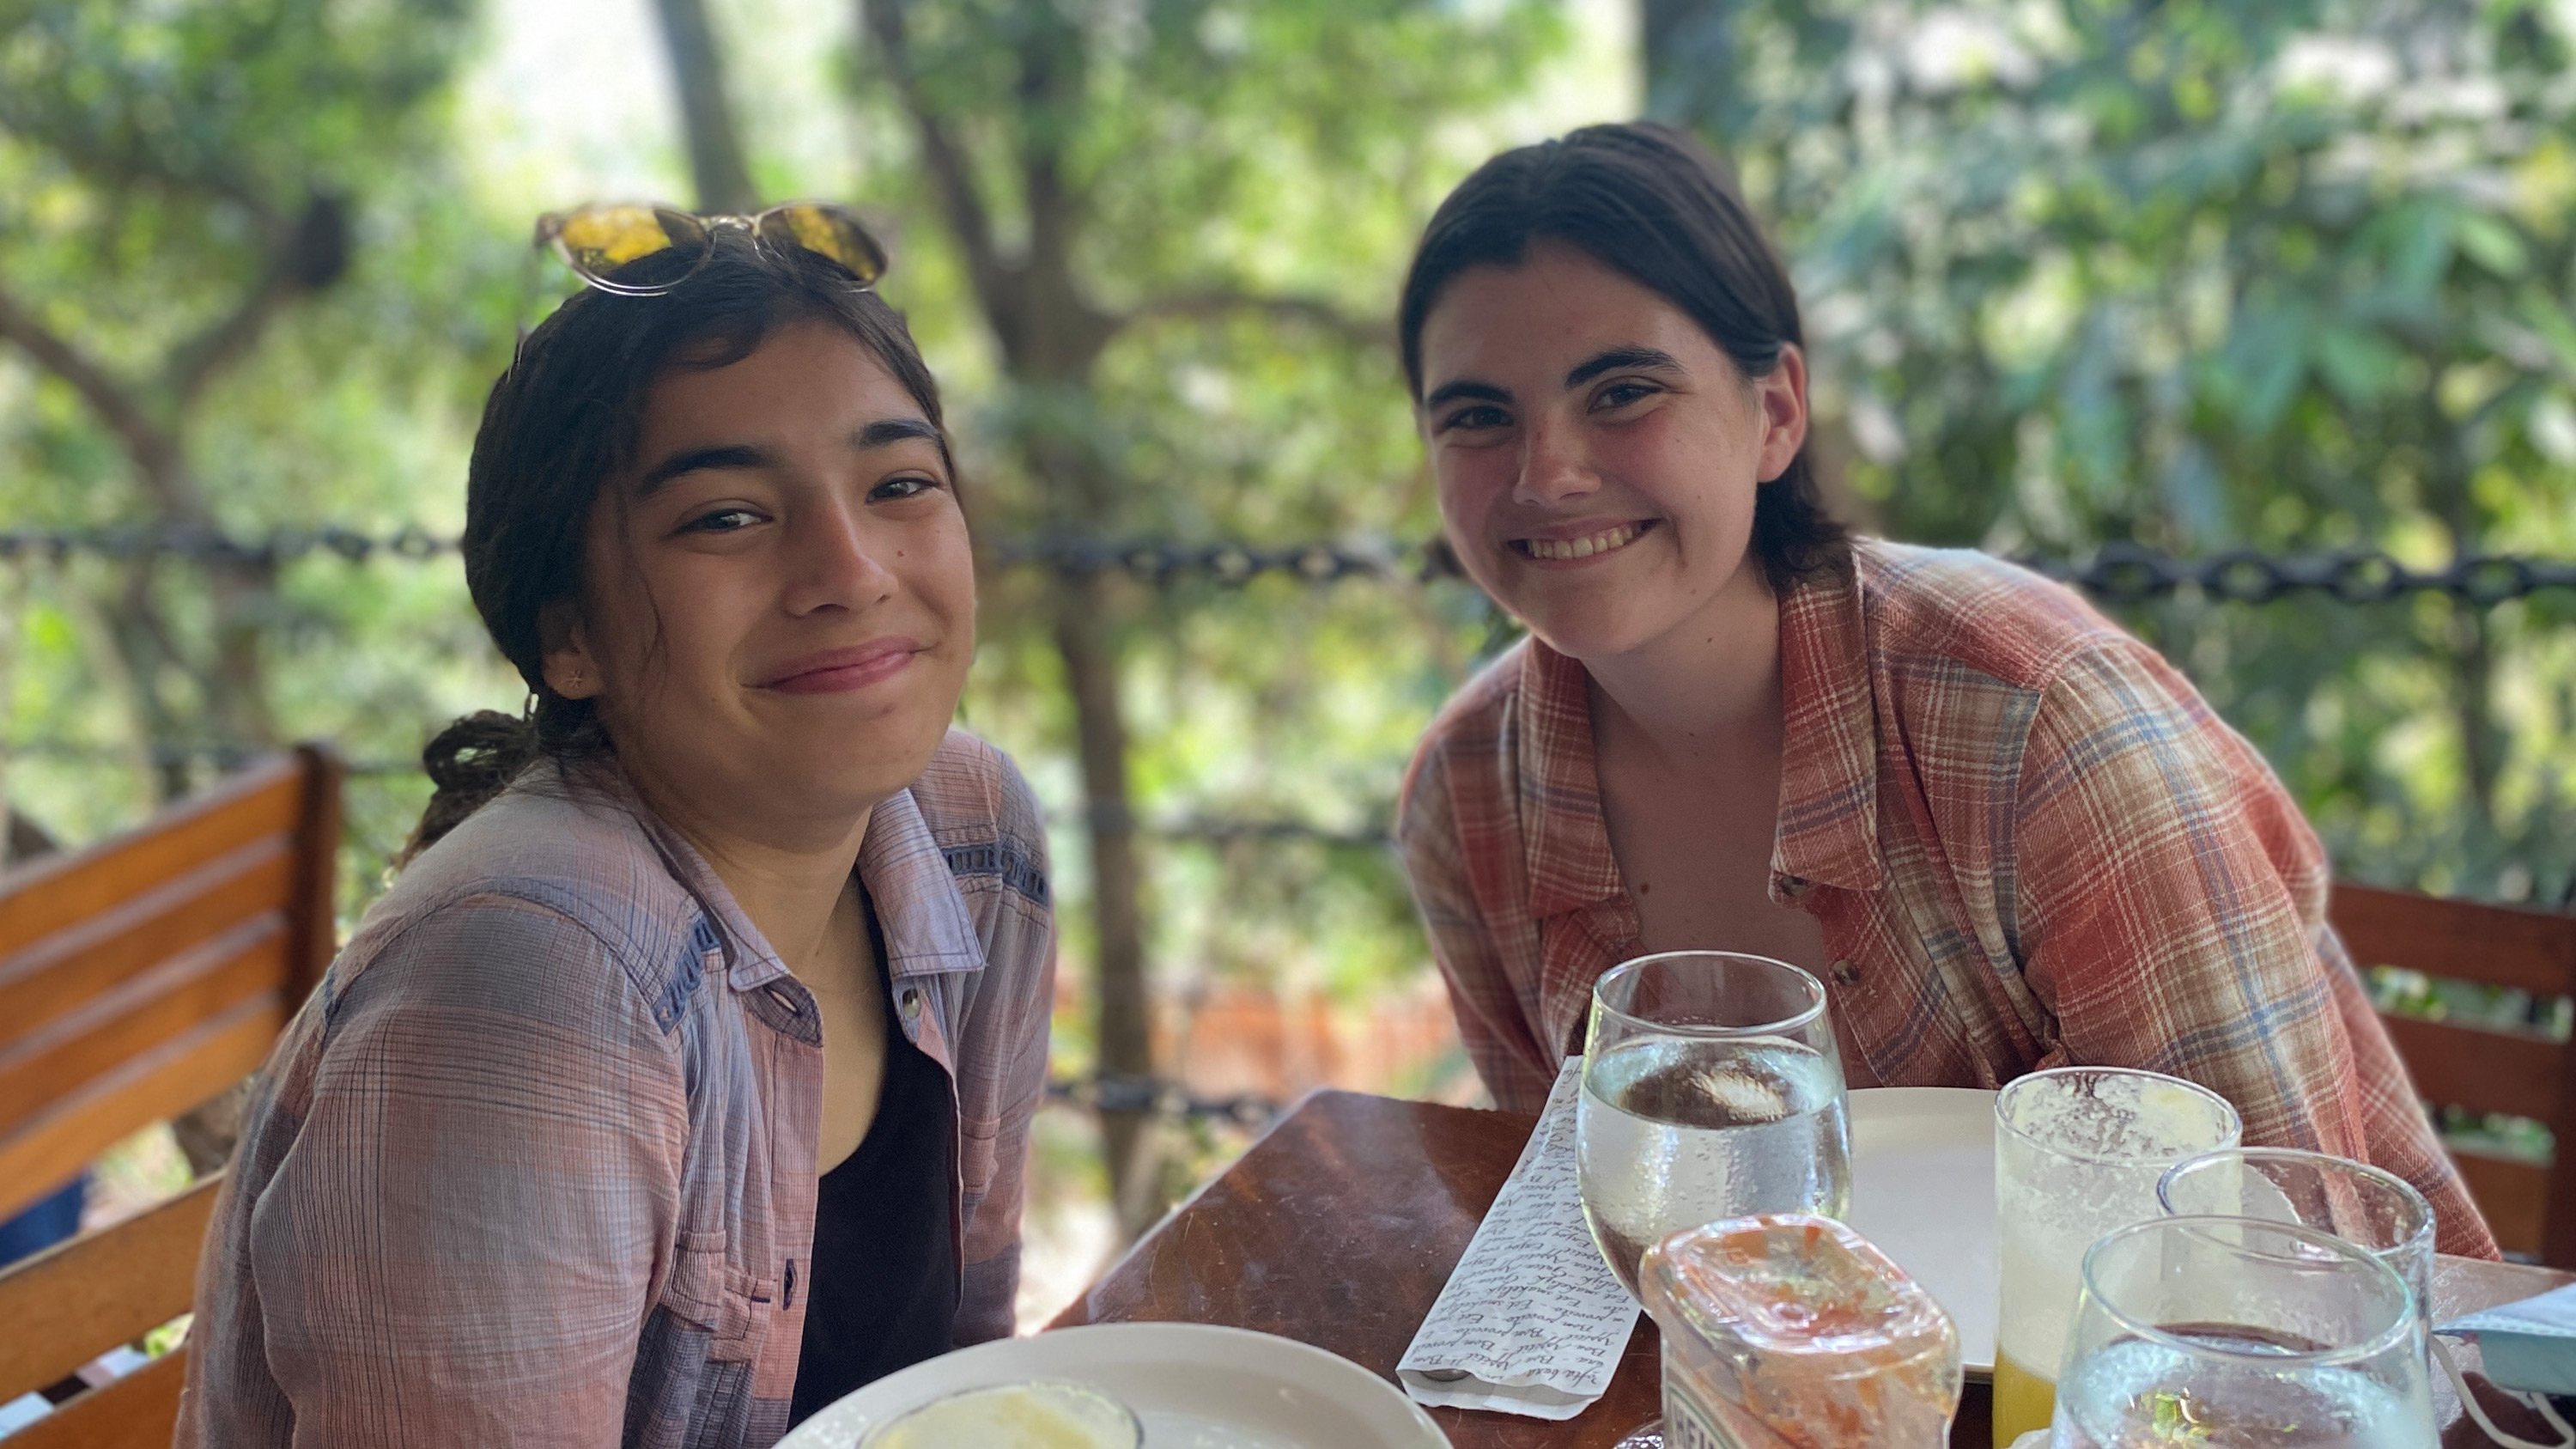 Sam P. at lunch with a classmate on their trip to Costa Rica.